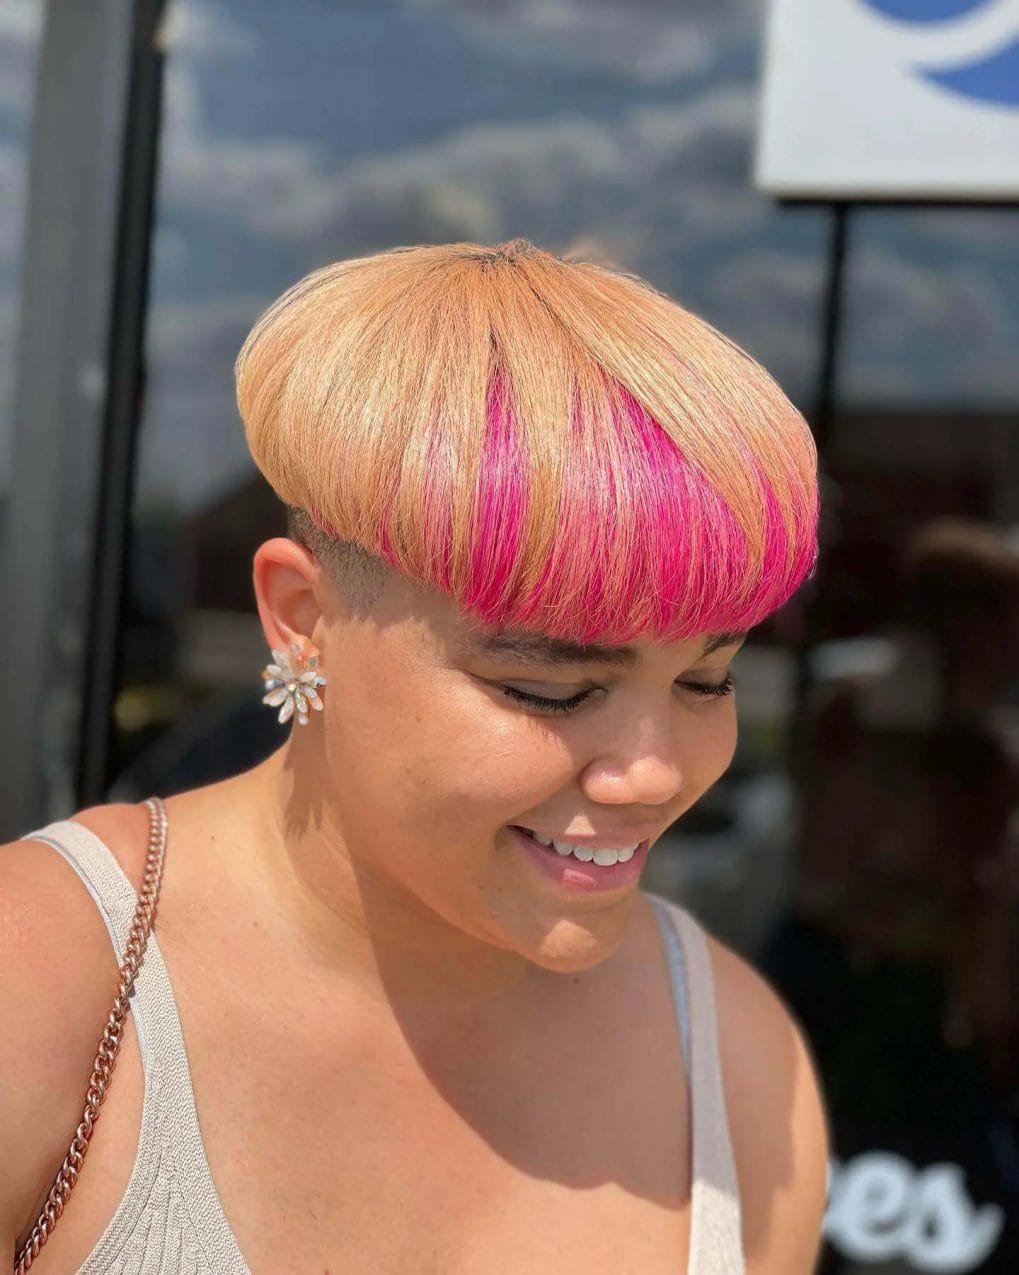 Mushroom cut with bold color transition from blonde to pink ends.